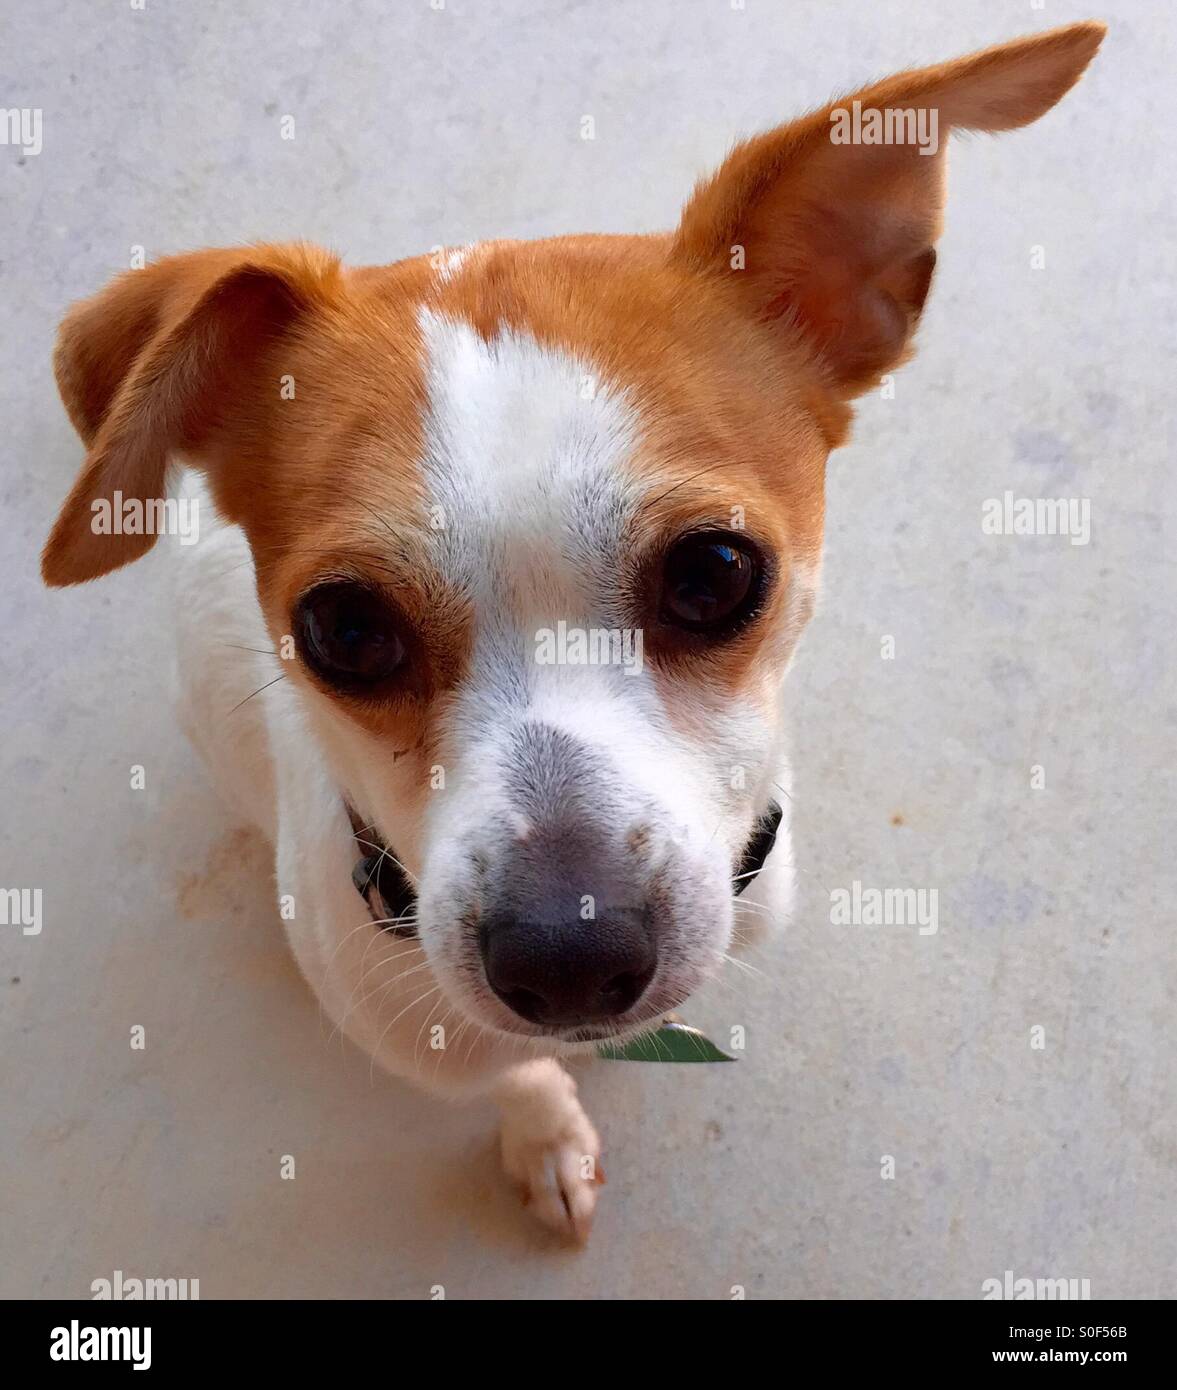 Jack Russell/Toy Fox Terrier mix with big eyes. Stock Photo